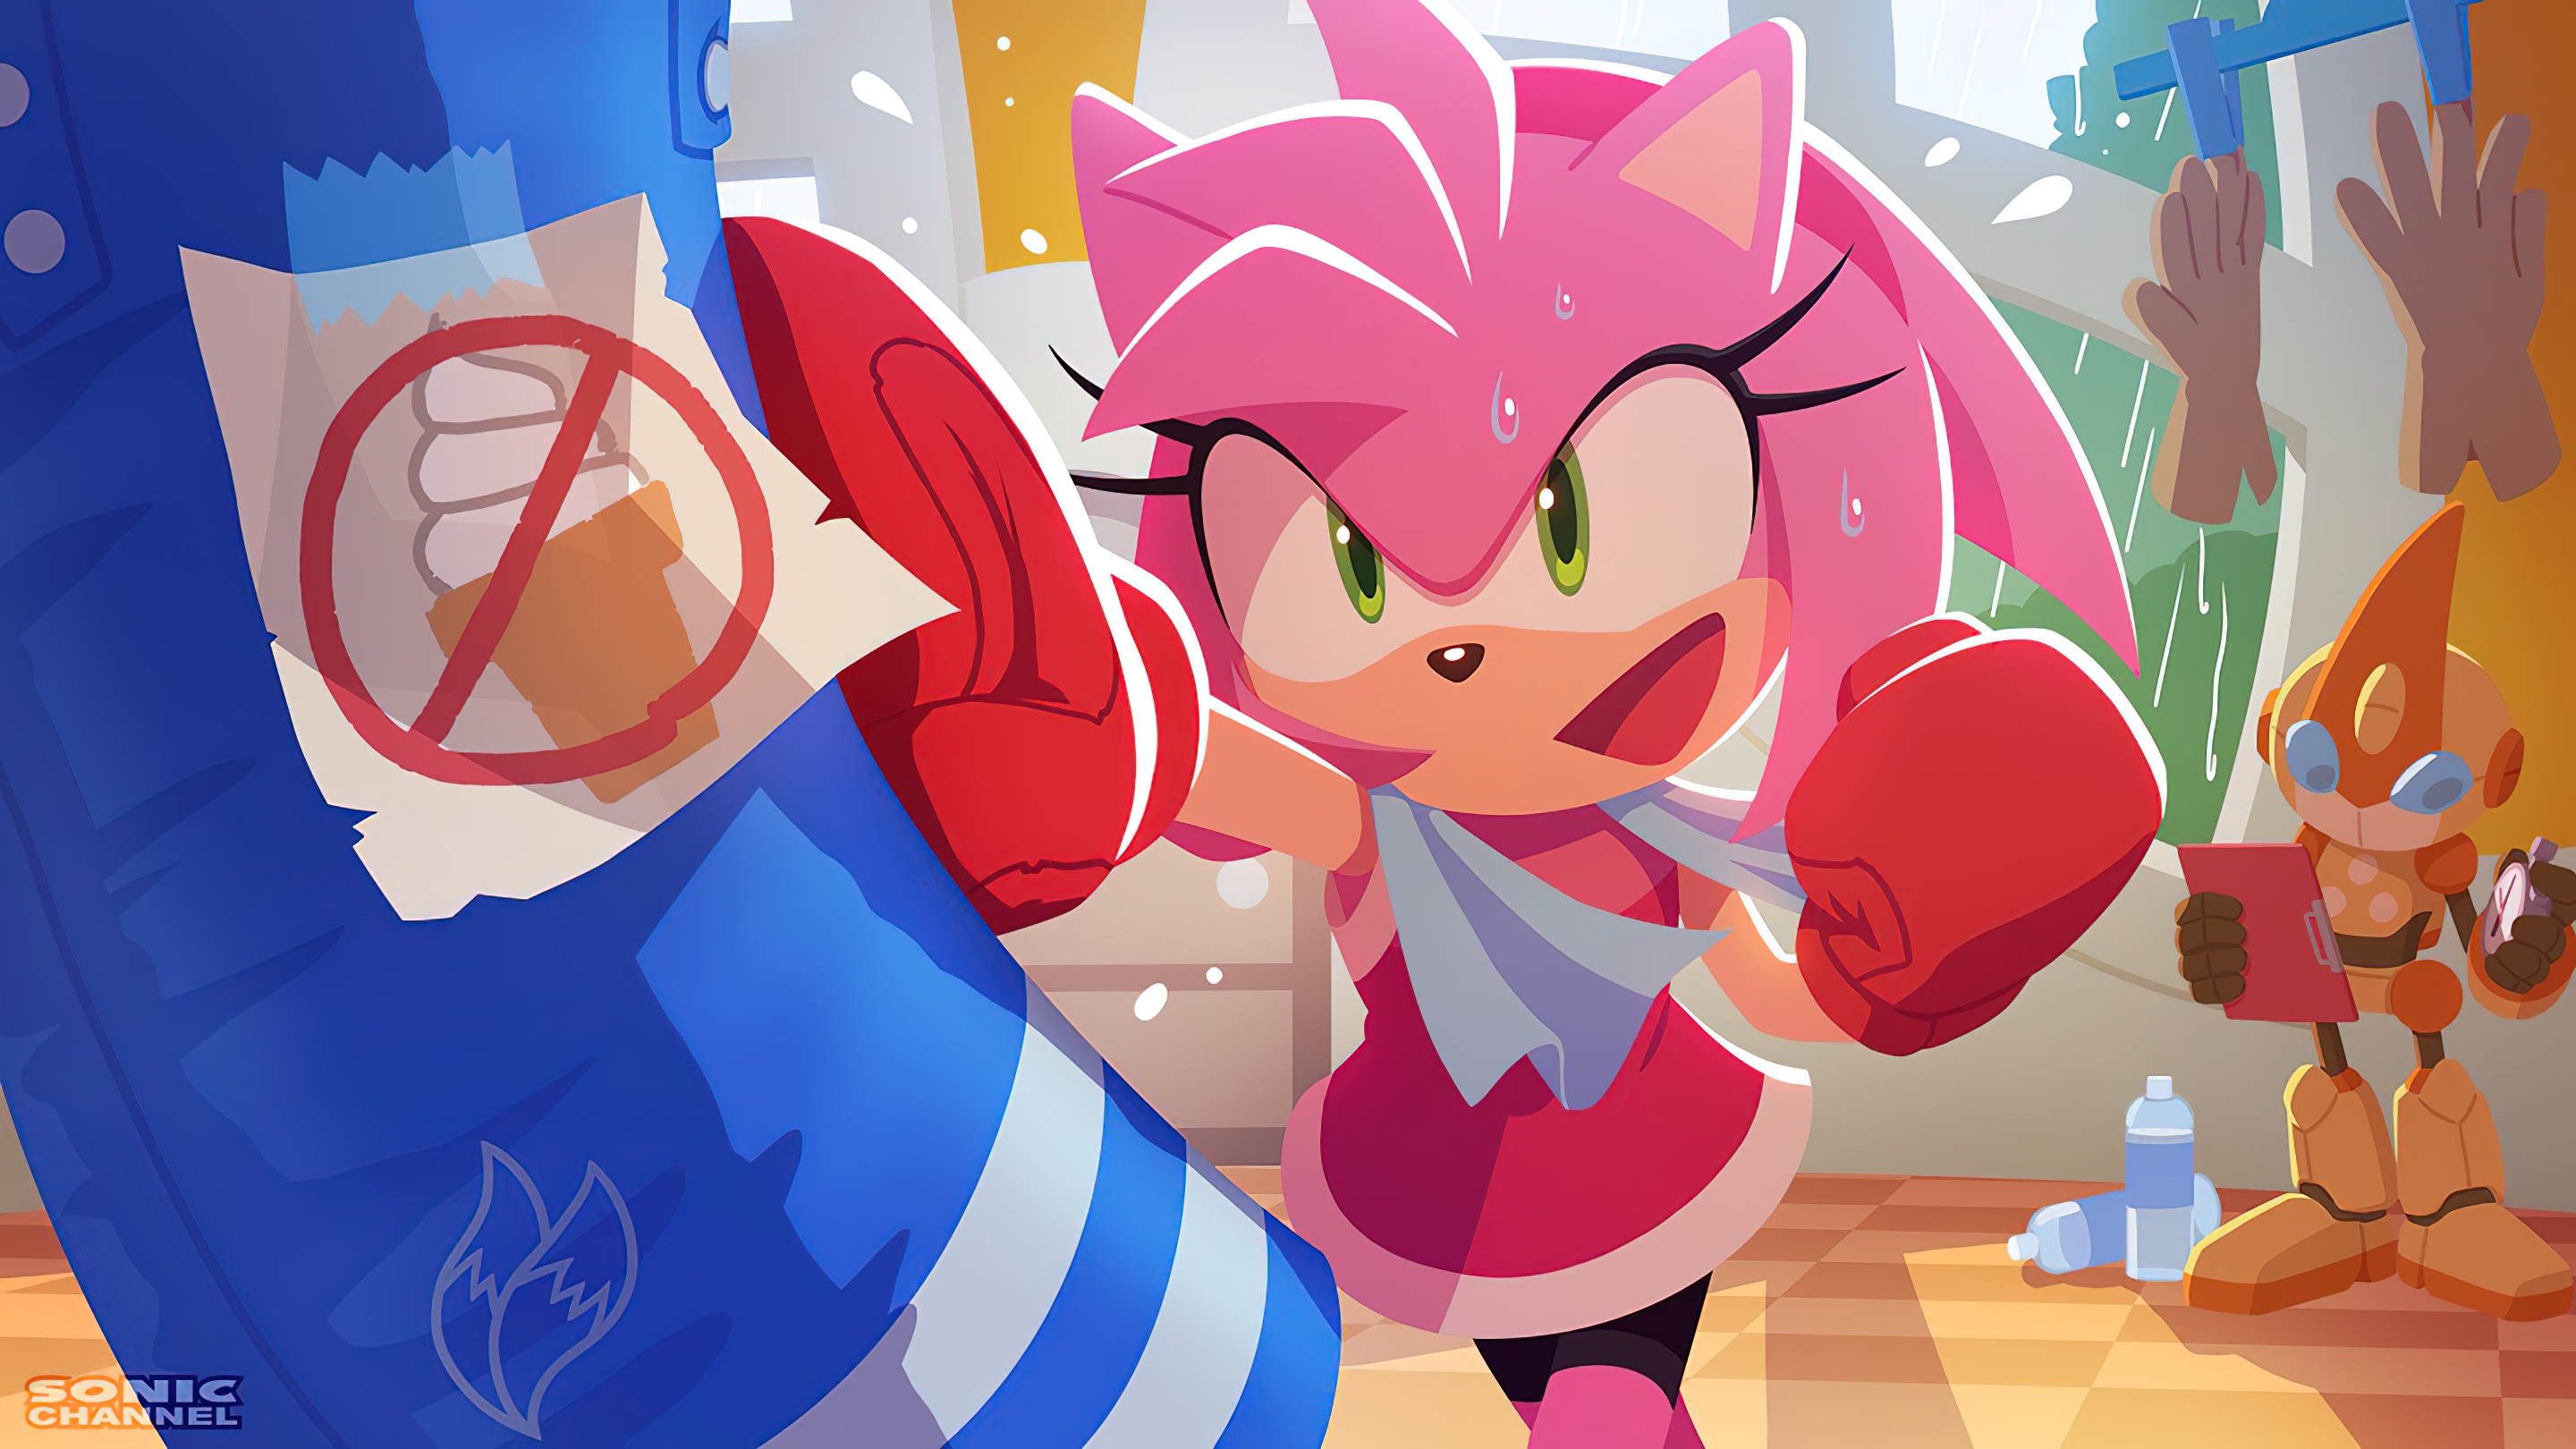 General 2880x1620 Sonic video game art Amy Rose punching bag boxing Yui Karasuno Sonic the Hedgehog sport comic art PC gaming Anthro video game characters artwork video games boxing gloves